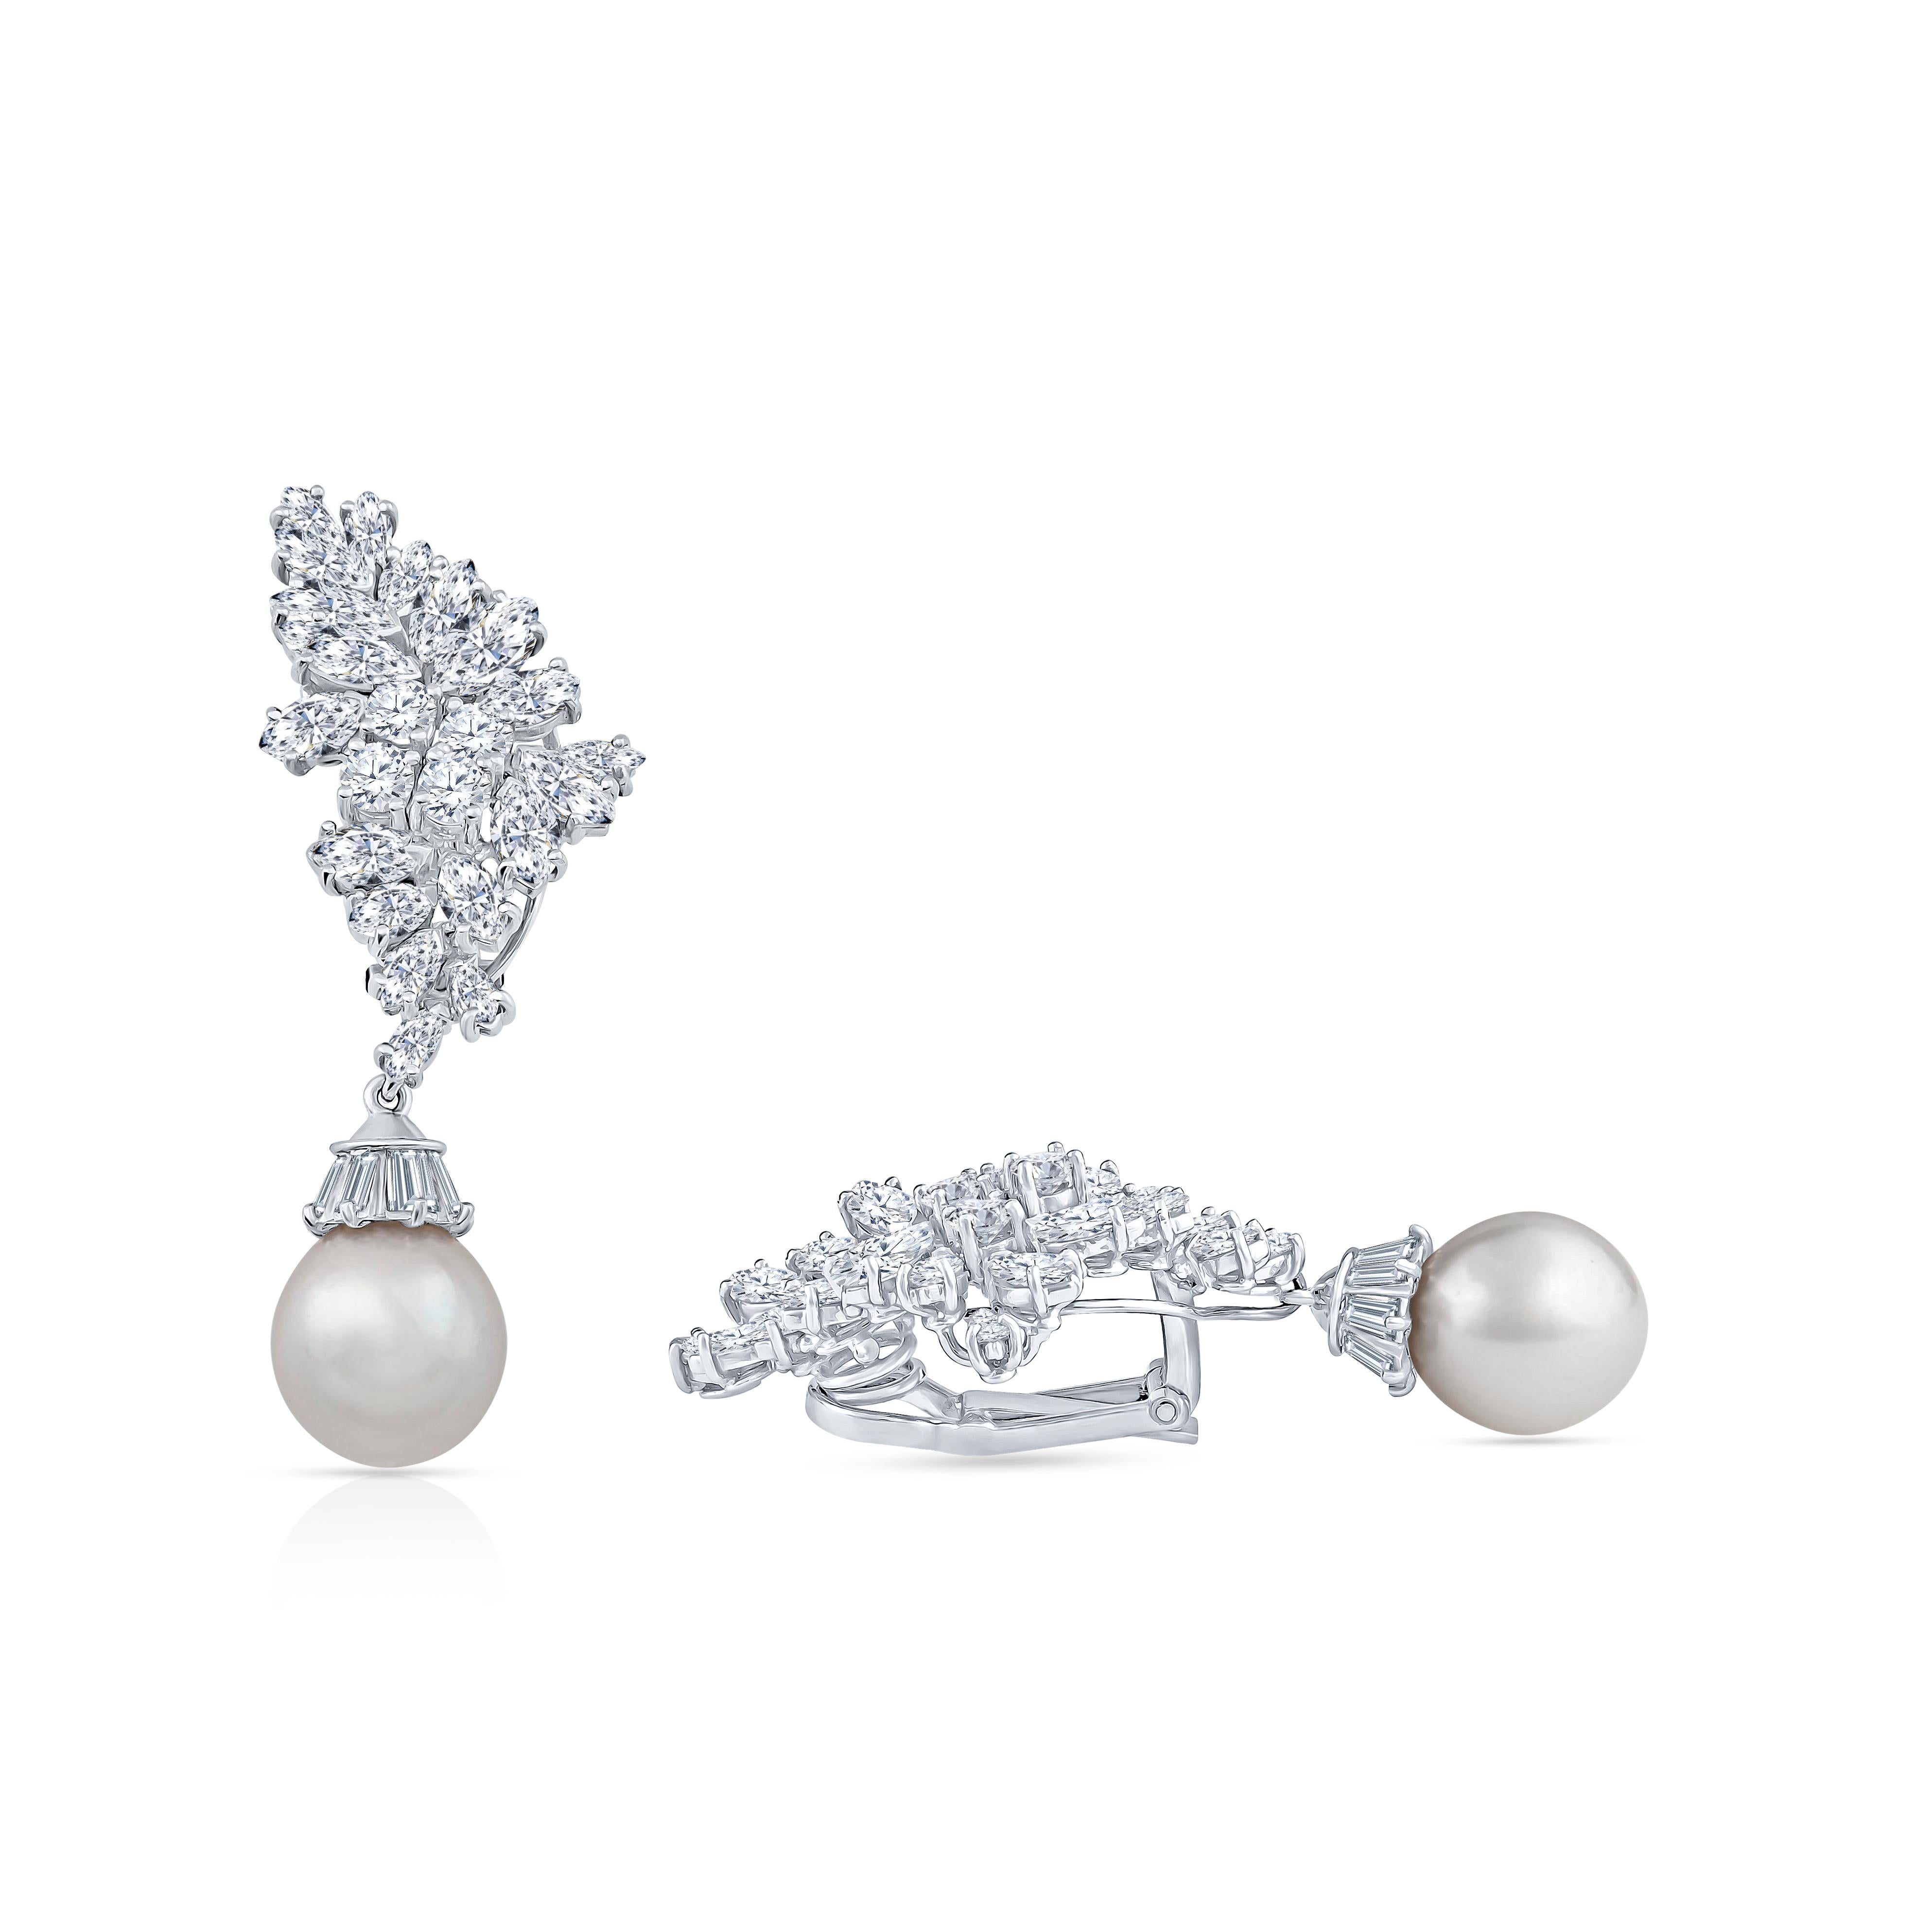 These stunning pearl drop earrings are accented by round brilliant and marquise cut diamonds totaling 10 carats. They are set in 18 karat white gold and feature clip on earring backs. The pearl drop can be removed to wear the diamonds alone.